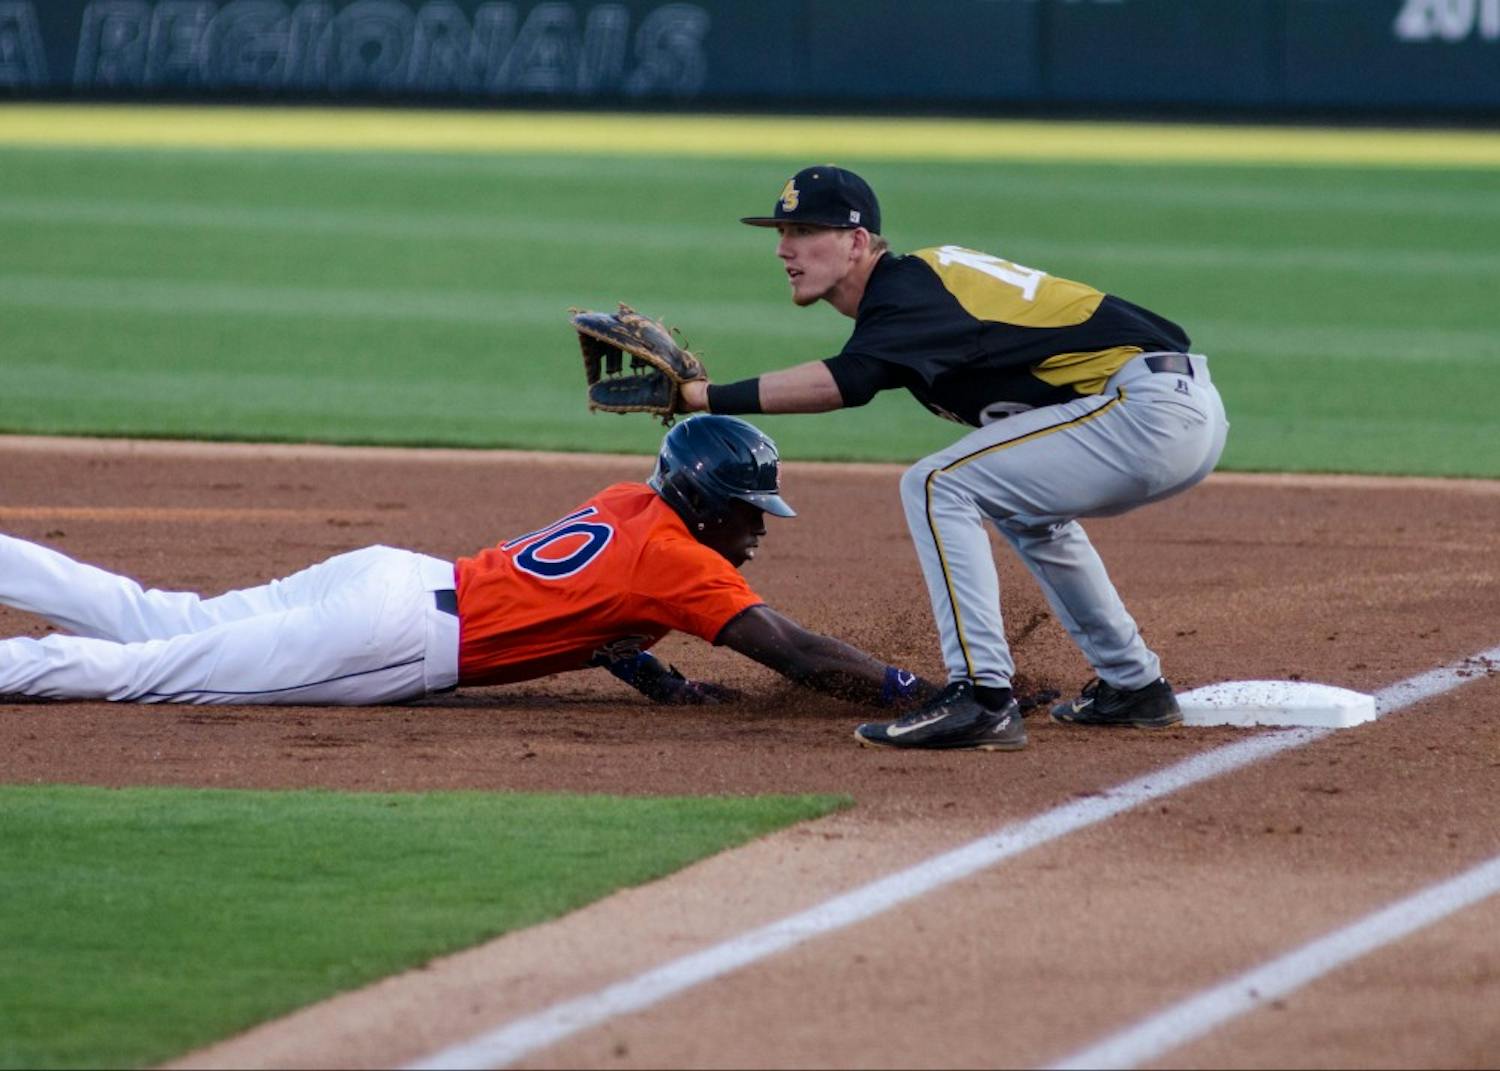 Anfernee Grier (10) beats the ball to first base during the Alabama State vs Auburn baseball game at Plainsman Park in Auburn, Ala., on Tuesday, March 23, 2016. Auburn defeated ASU 11-0.